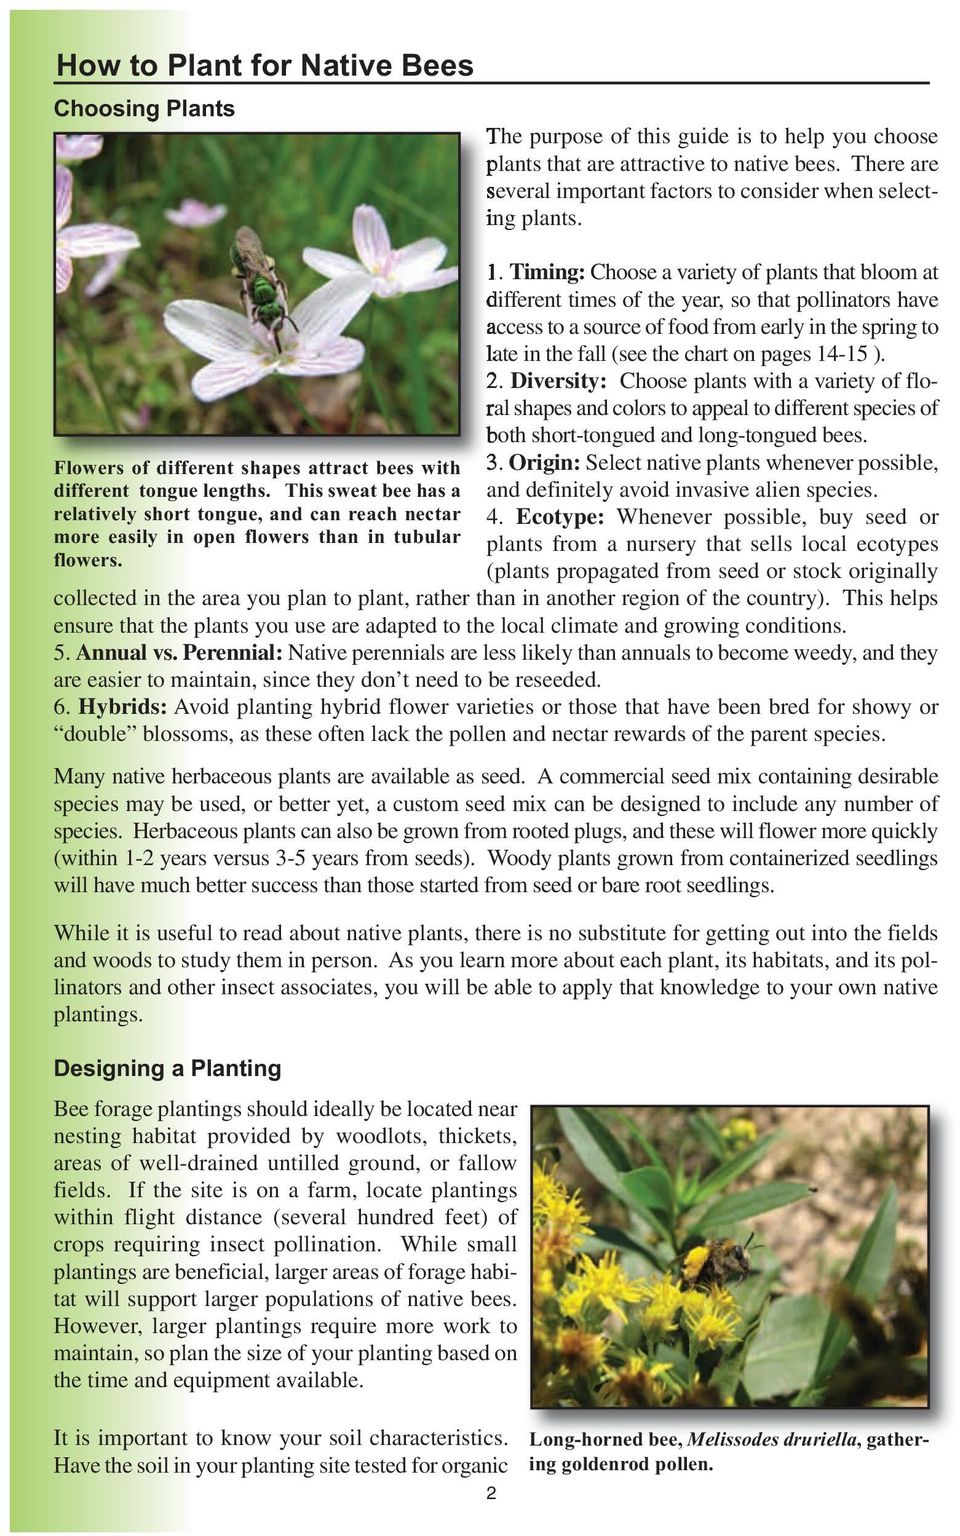 The purpose of this guide is to help you choose plants that are attractive to native bees. There are several important factors to consider when selecting plants. 1.